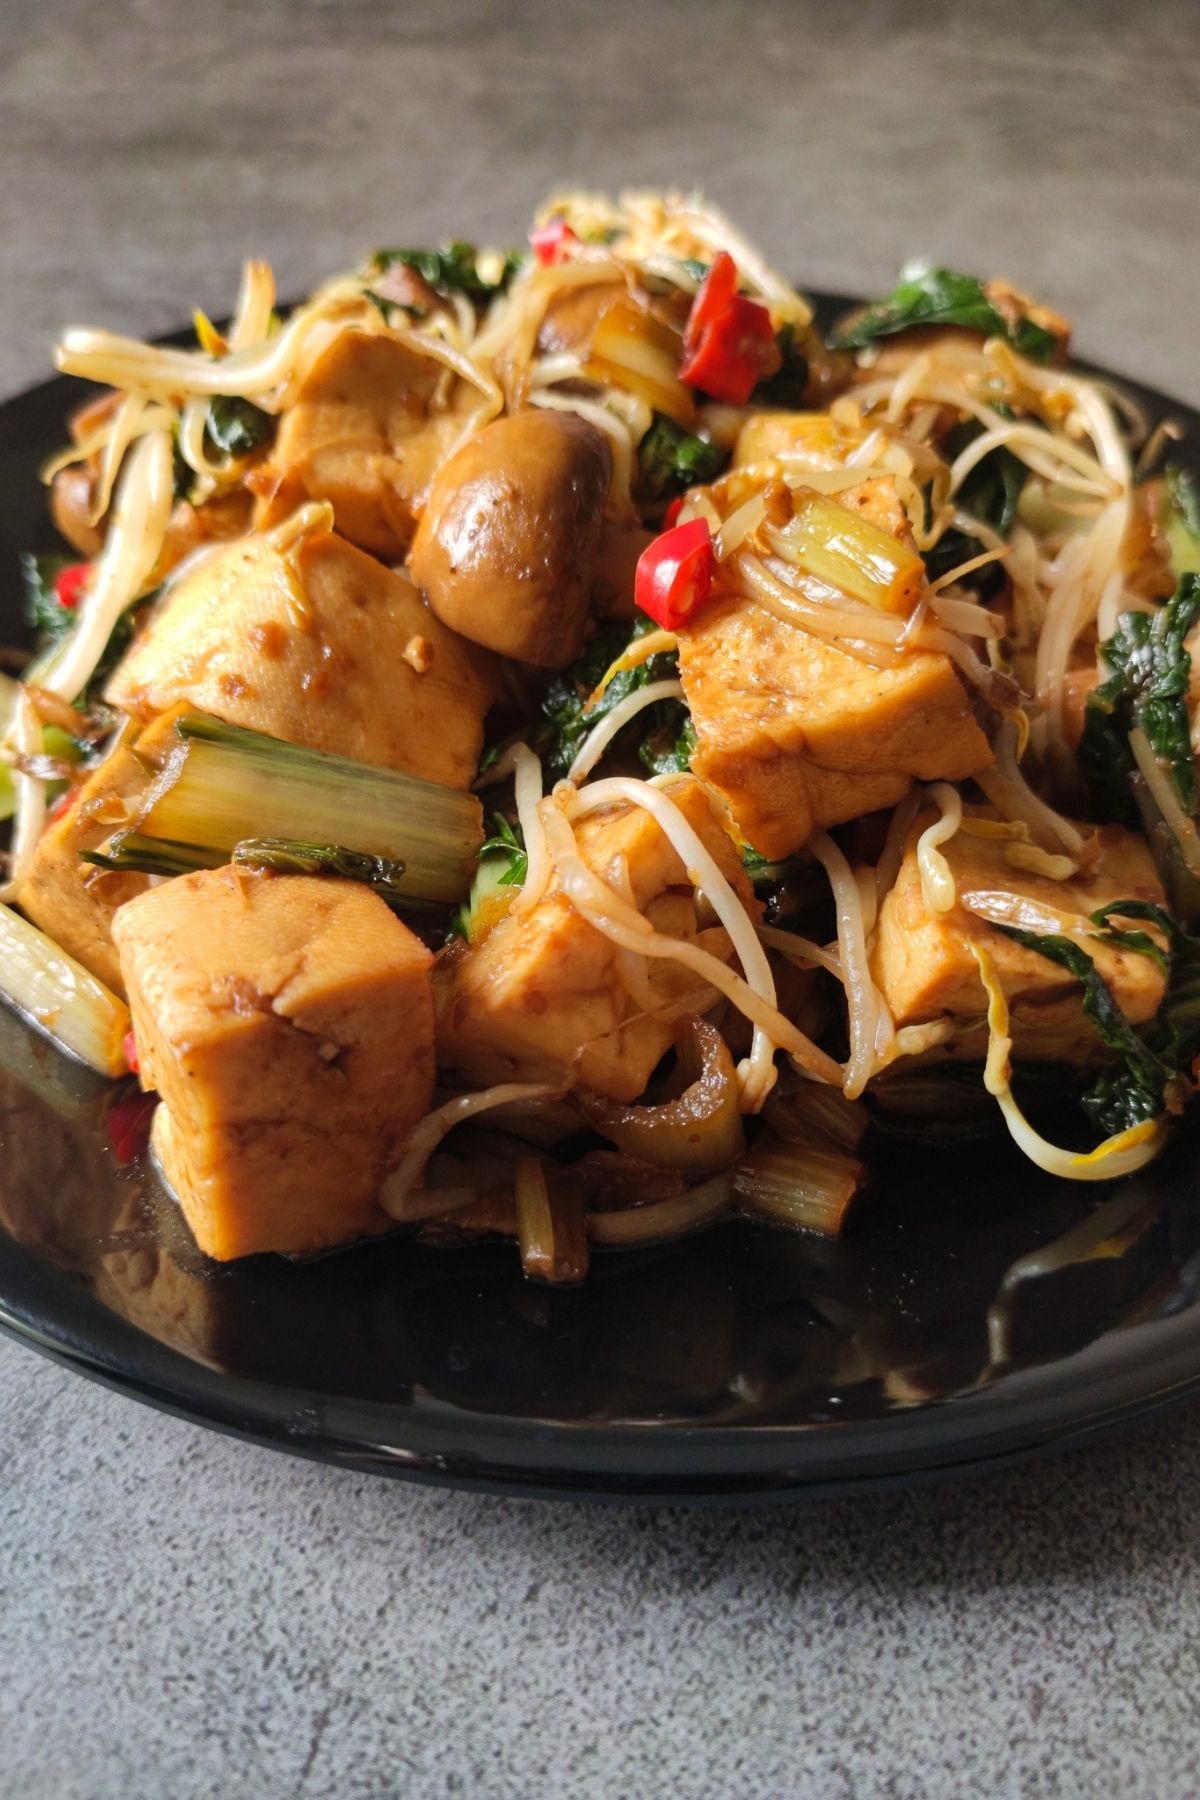 Stir fried tofu with bean sprouts and mushrooms on a black plate